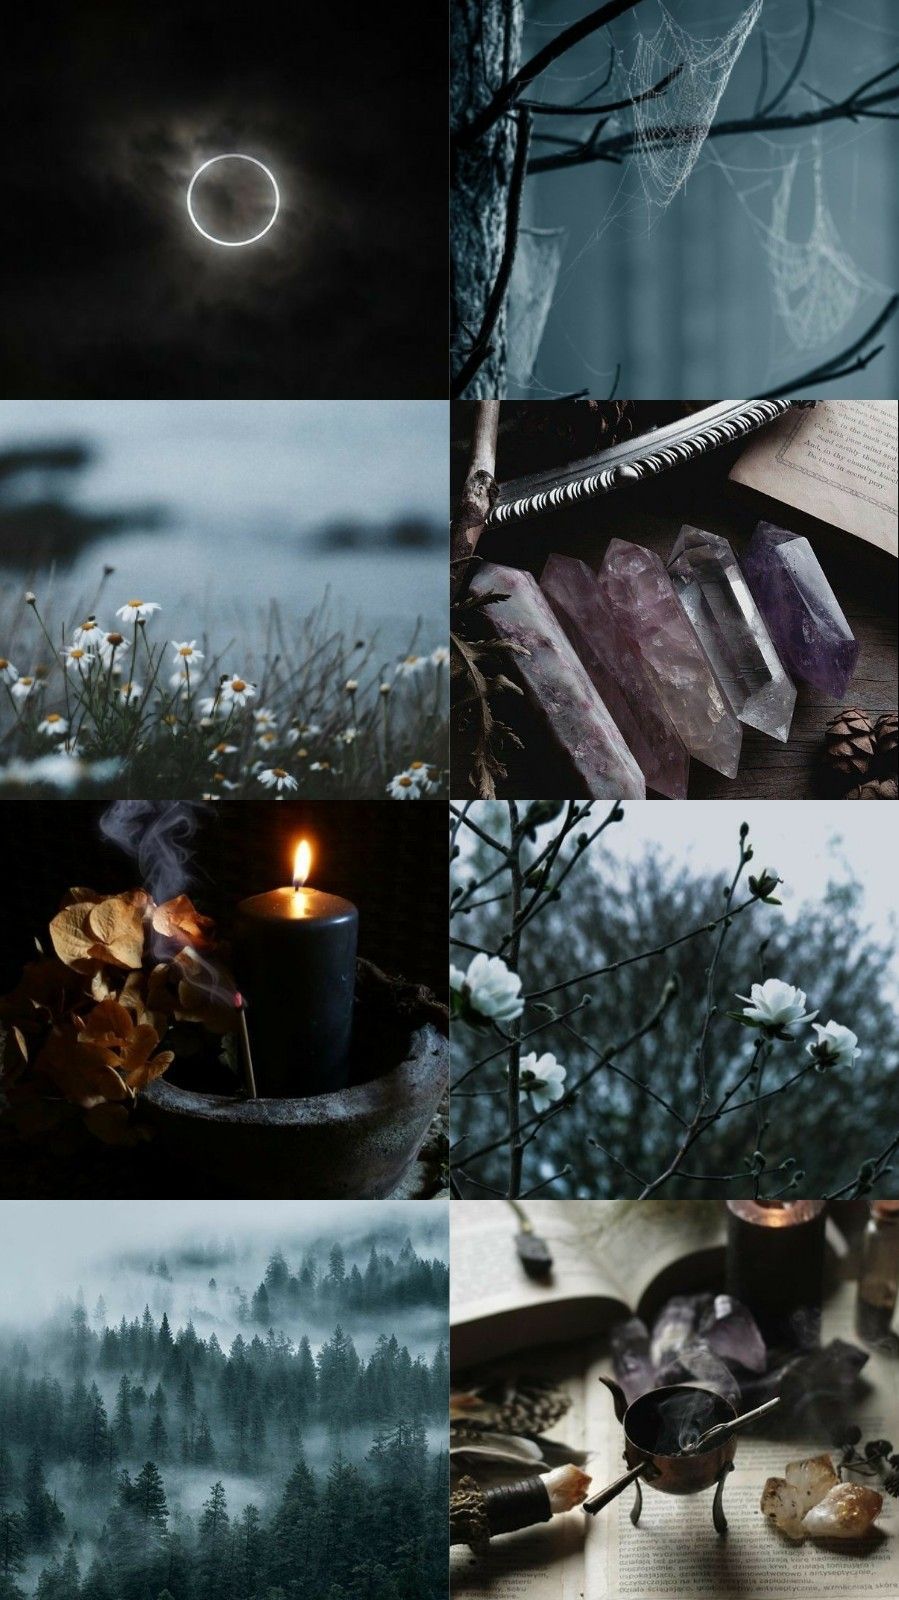 A collage of pictures with different themes - Capricorn, witch